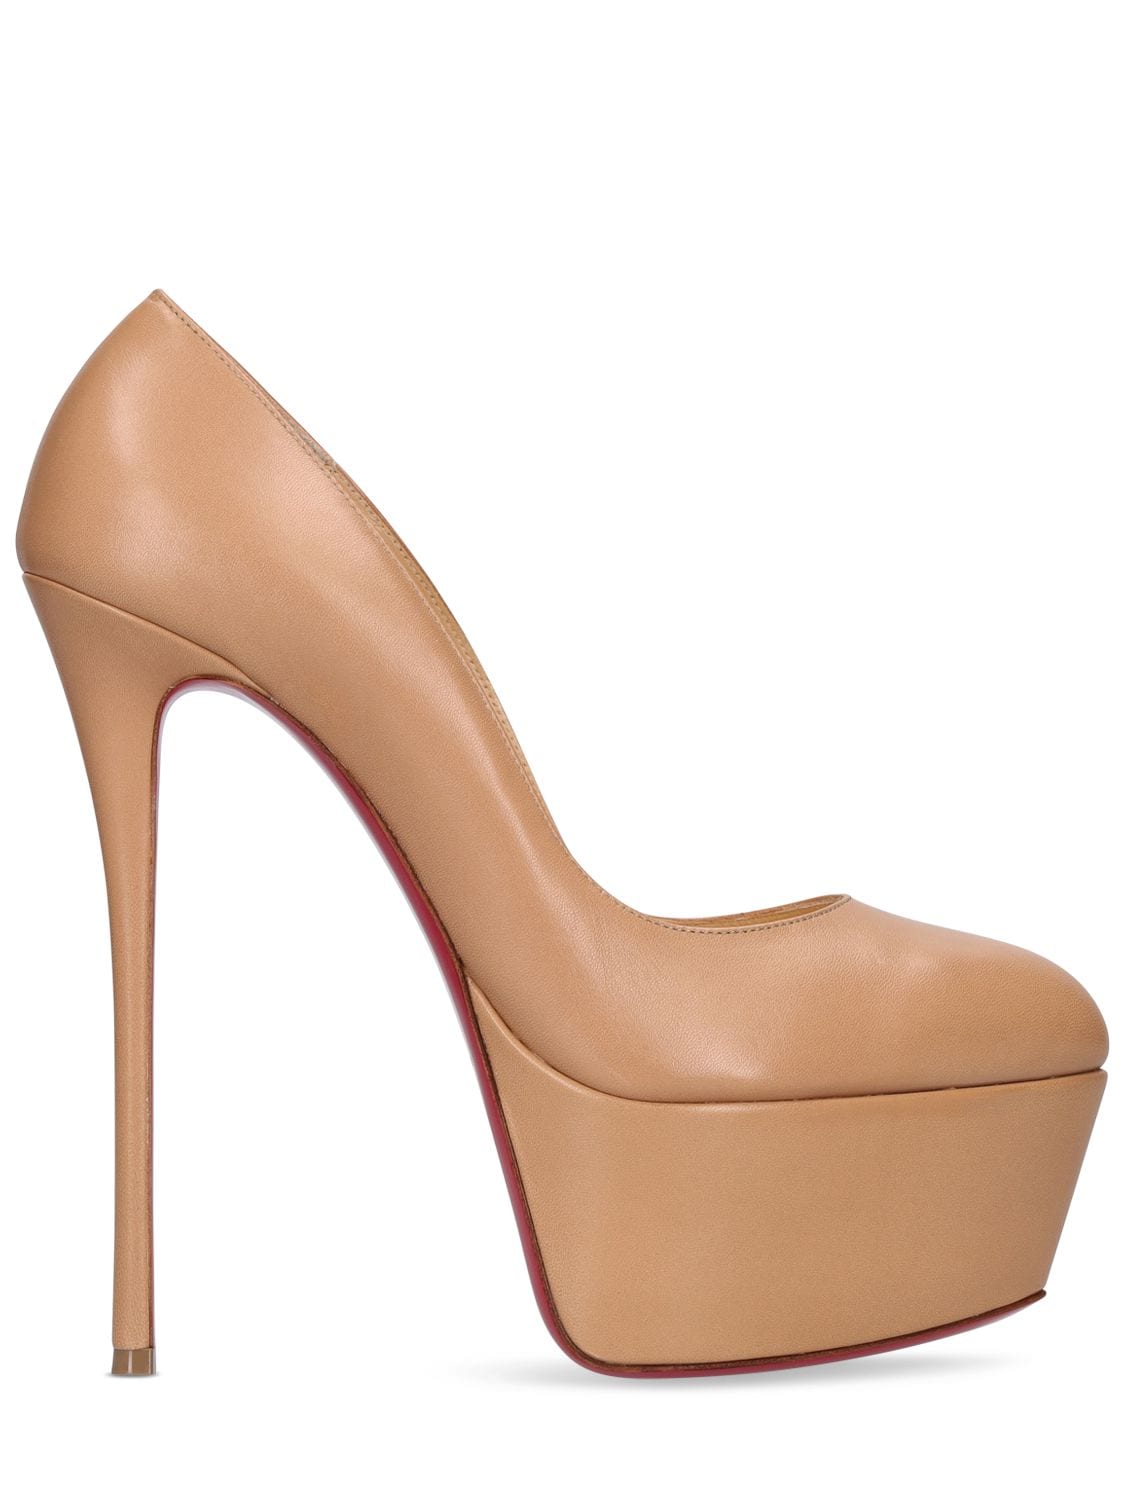 Shop Christian Louboutin 160mm Dolly Leather Platform Pumps In Nude